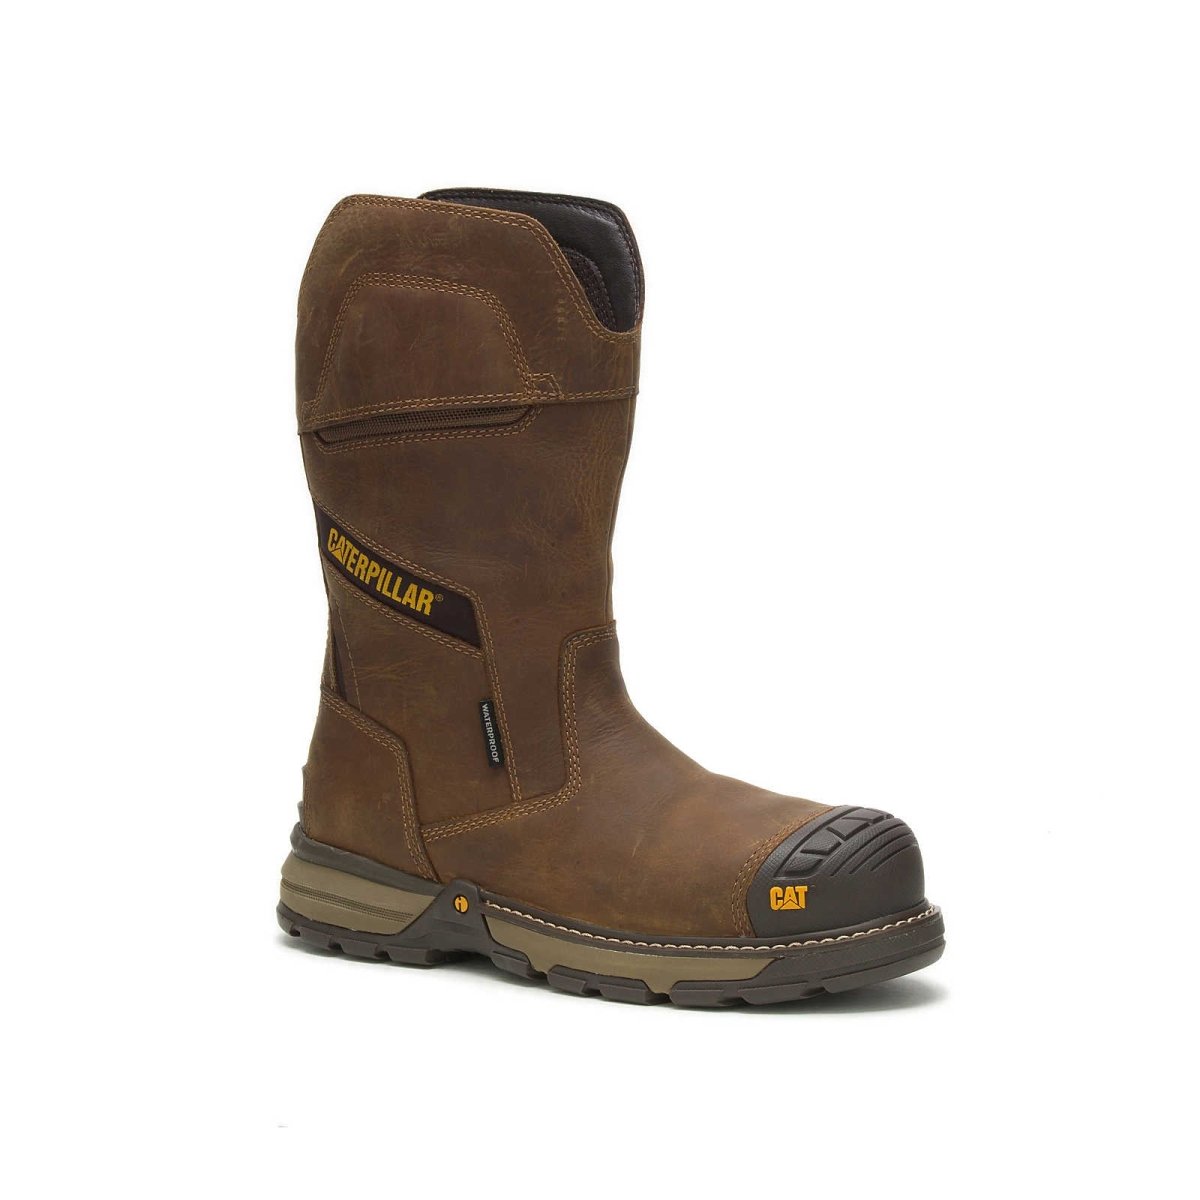 CATERPILLAR EXCAVATOR SUPERLITE (P91448) PULL-ON WATERPROOF CARBON COMPOSITE TOE MEN'S WORK BOOT IN PYRAMID - TLW Shoes